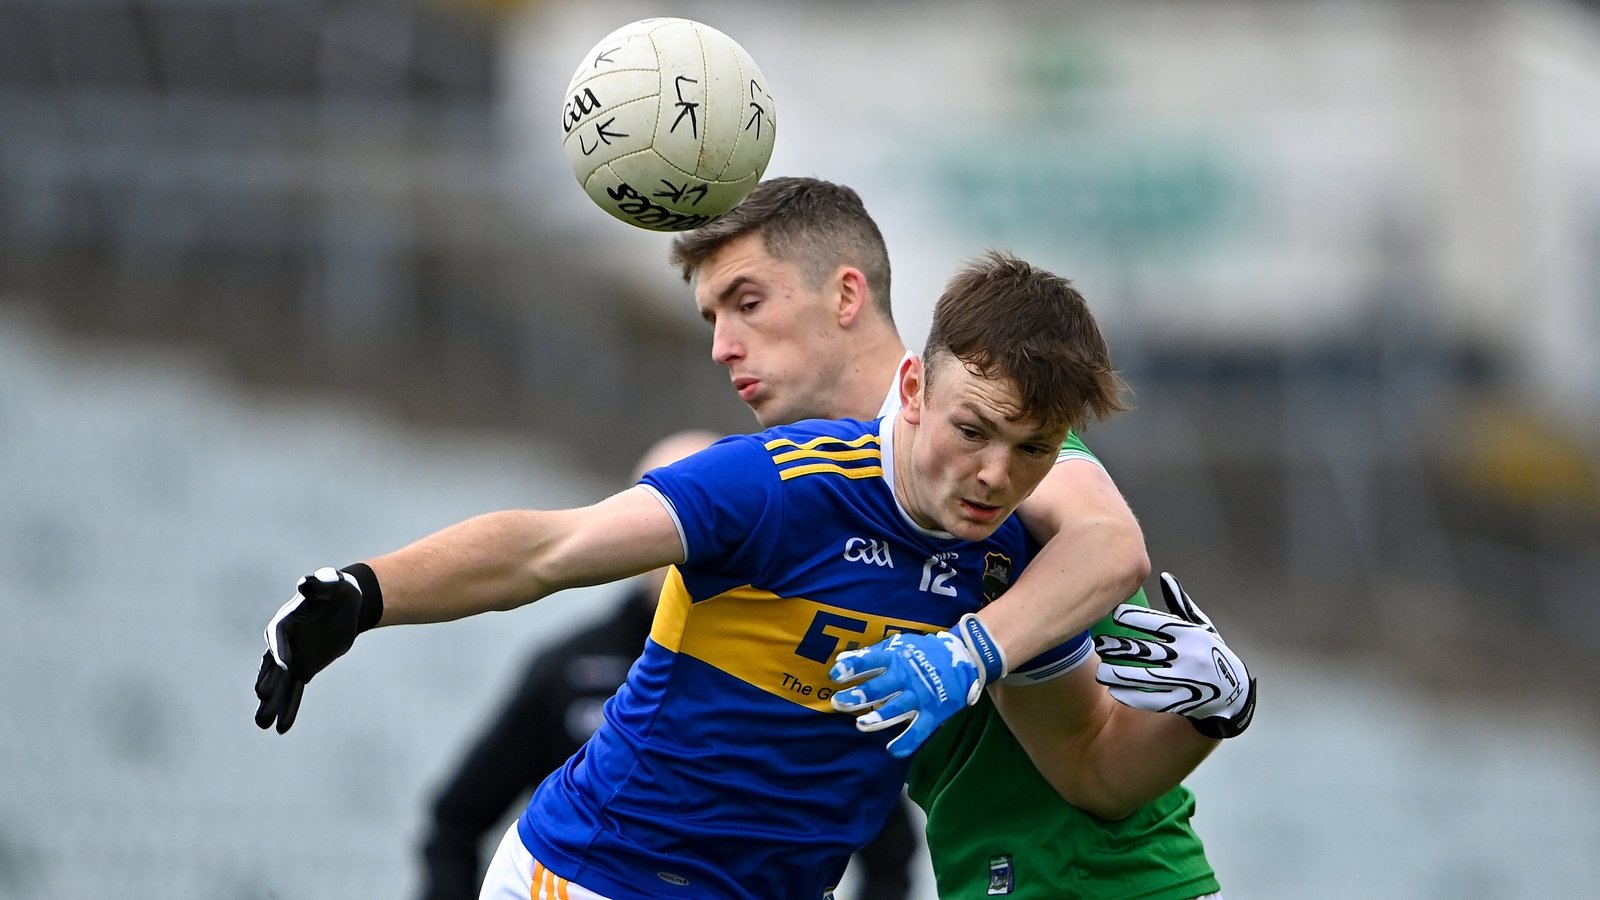 Tip Munster reached the final after the tense battle of Limerick

